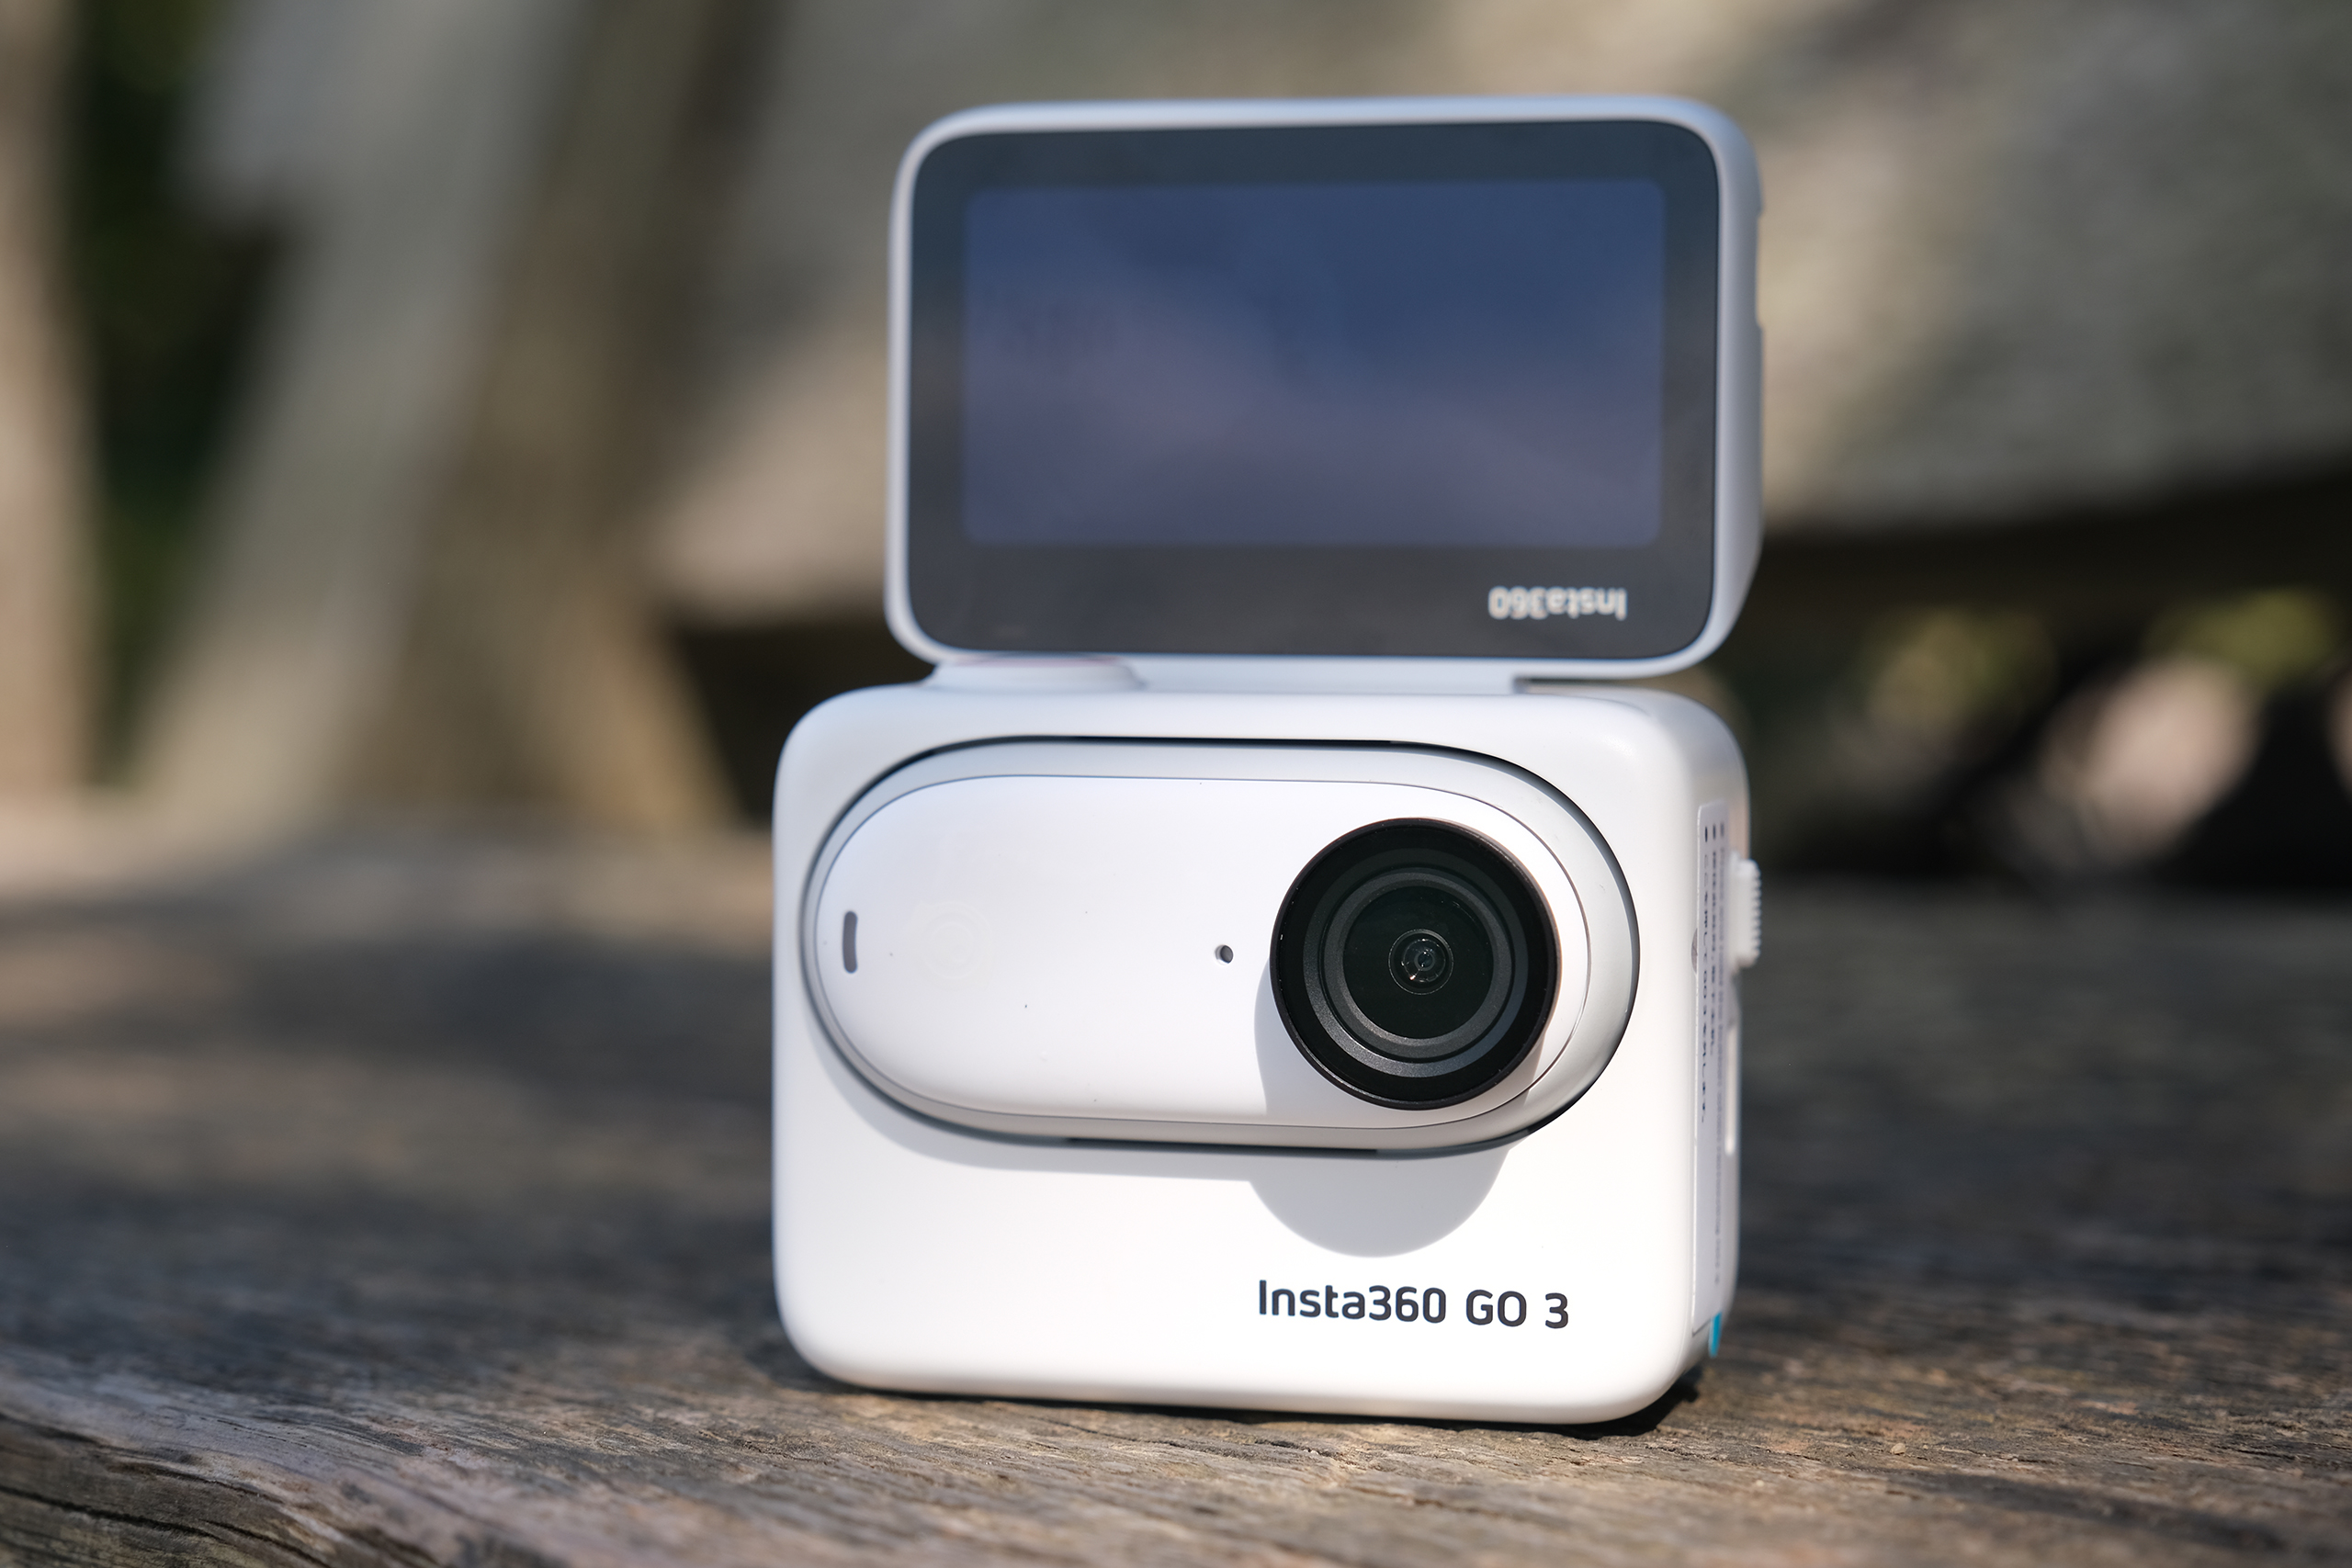 Insta360 X3 action cam uses new 48MP sensors, larger touchscreen & better  performance: Digital Photography Review